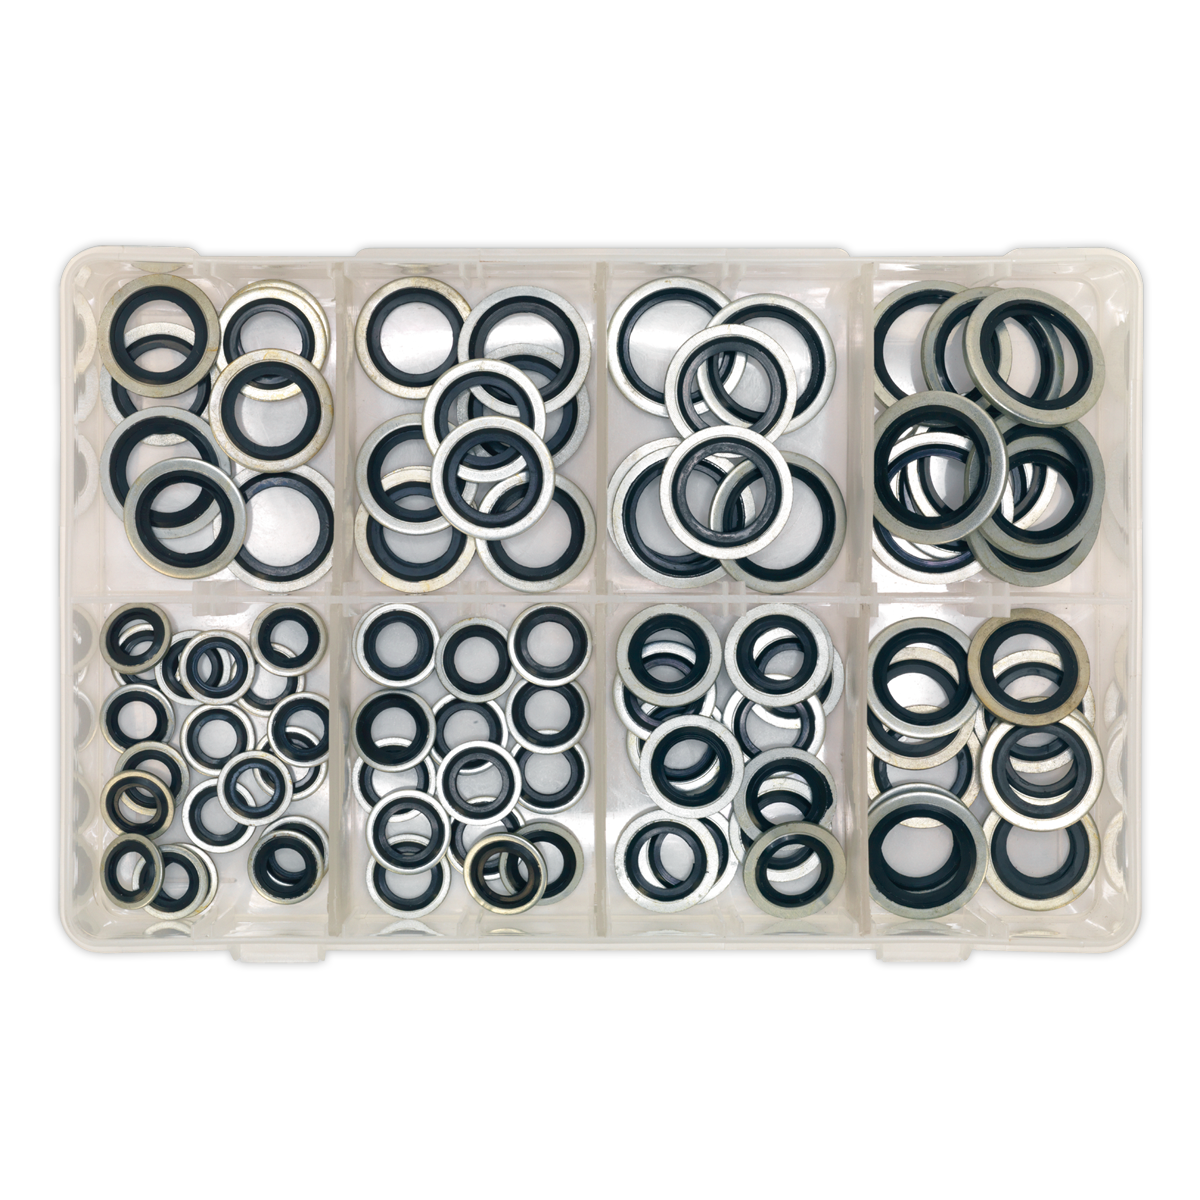 Sealey 88pc Bonded Seals Assortment - Metric AB010DS